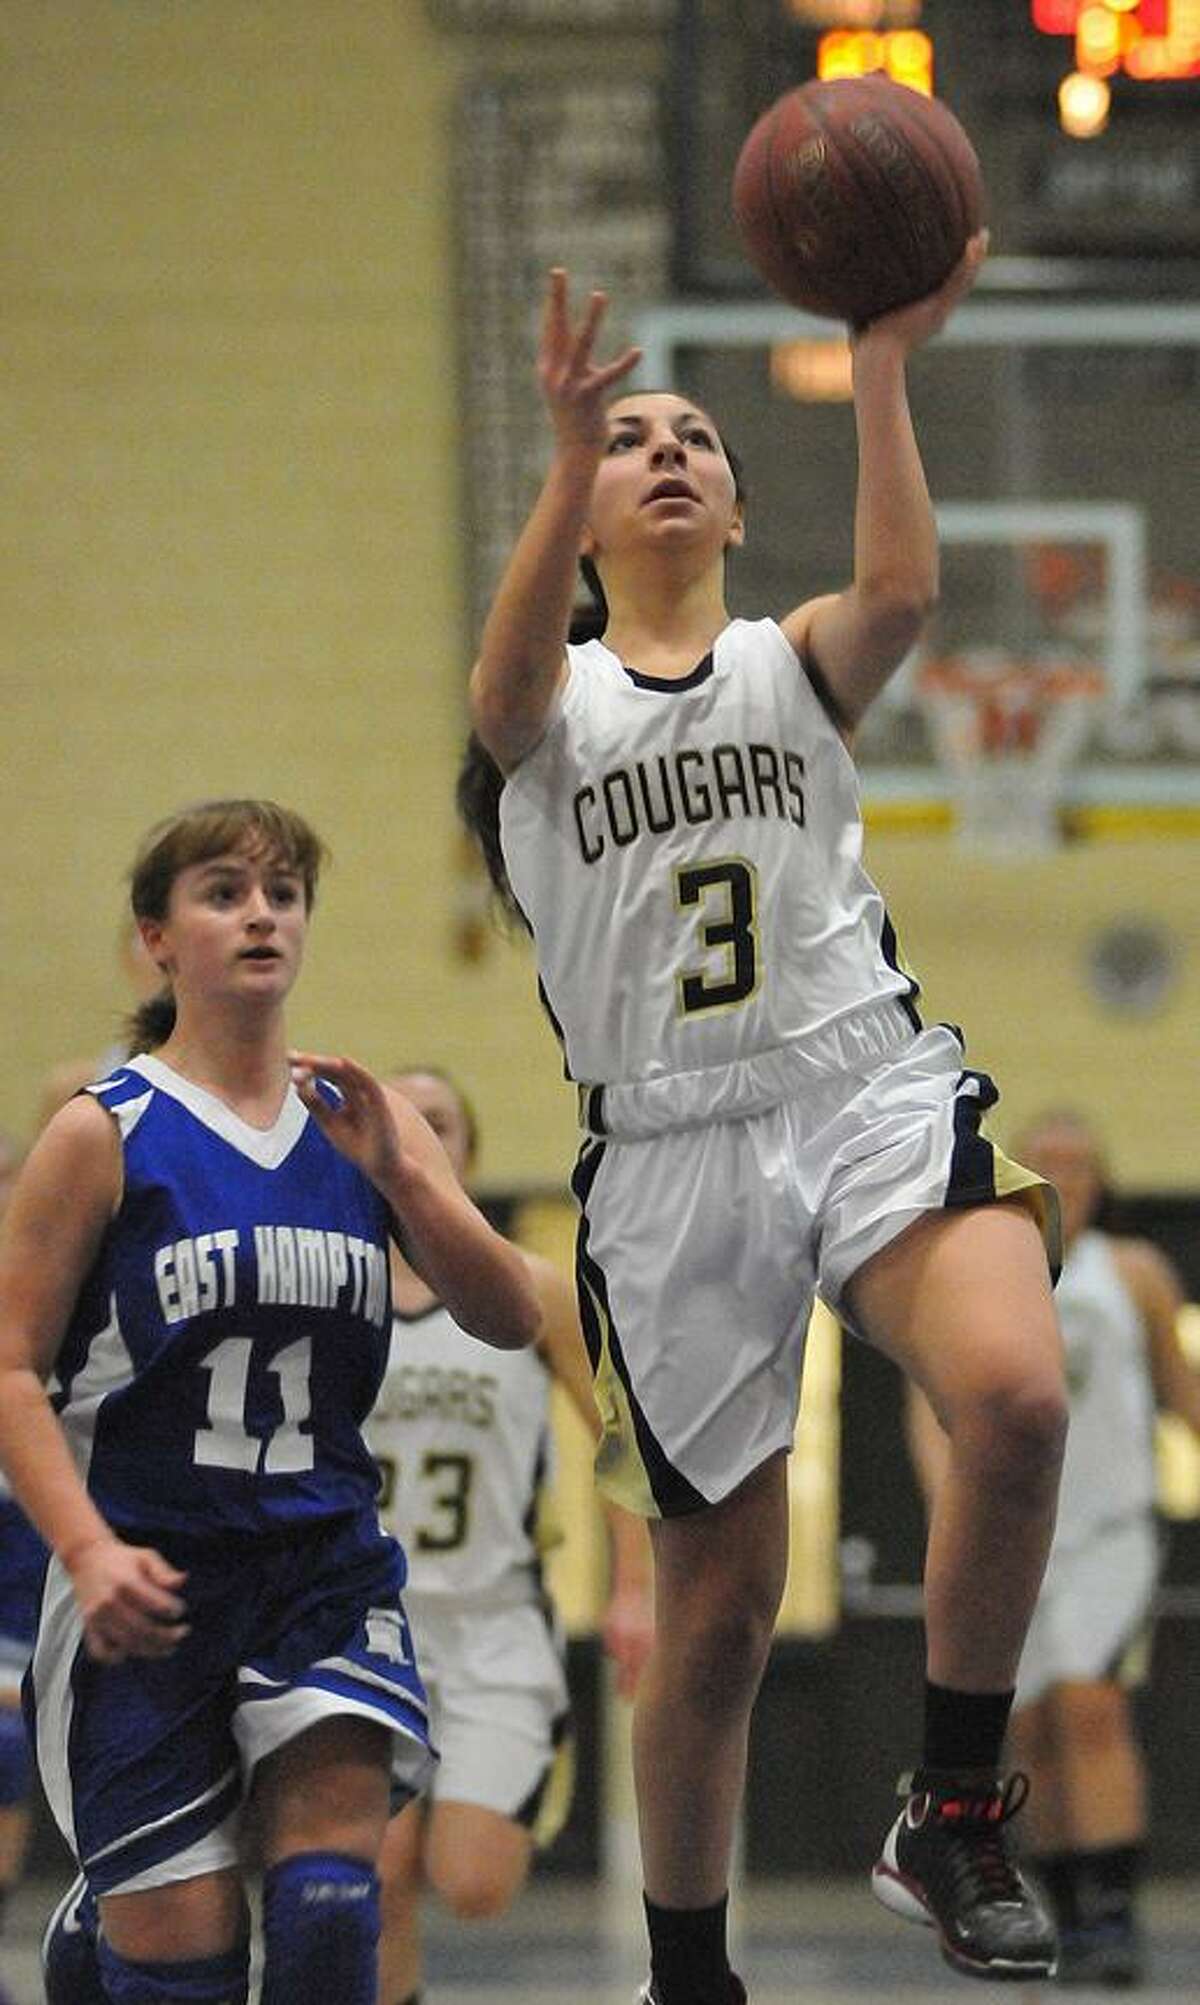 Catherine Avalone/The Middletown PressHaddam-Killingworth junior guard Maya Savino drives past East Hampton freshman point guard Renee Radavich and goes for two Monday night in Higganum. The H-K Cougars defeated the East Hampton Bellringers 48-22 in the .